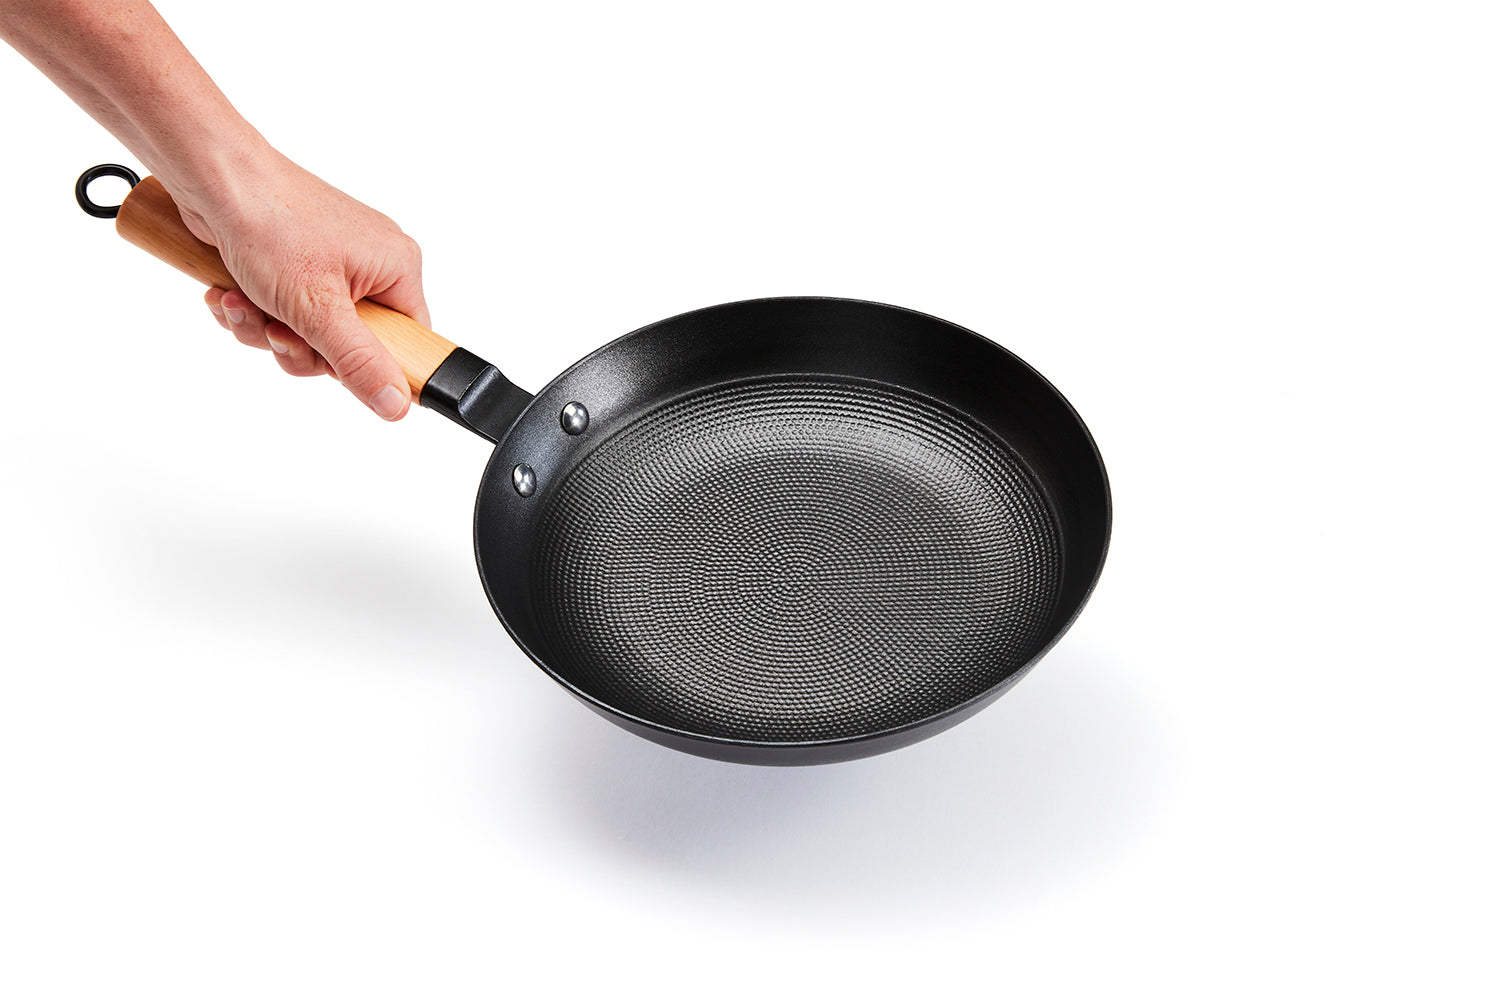 Charmate 24cm Round Cast Iron Frying Pan